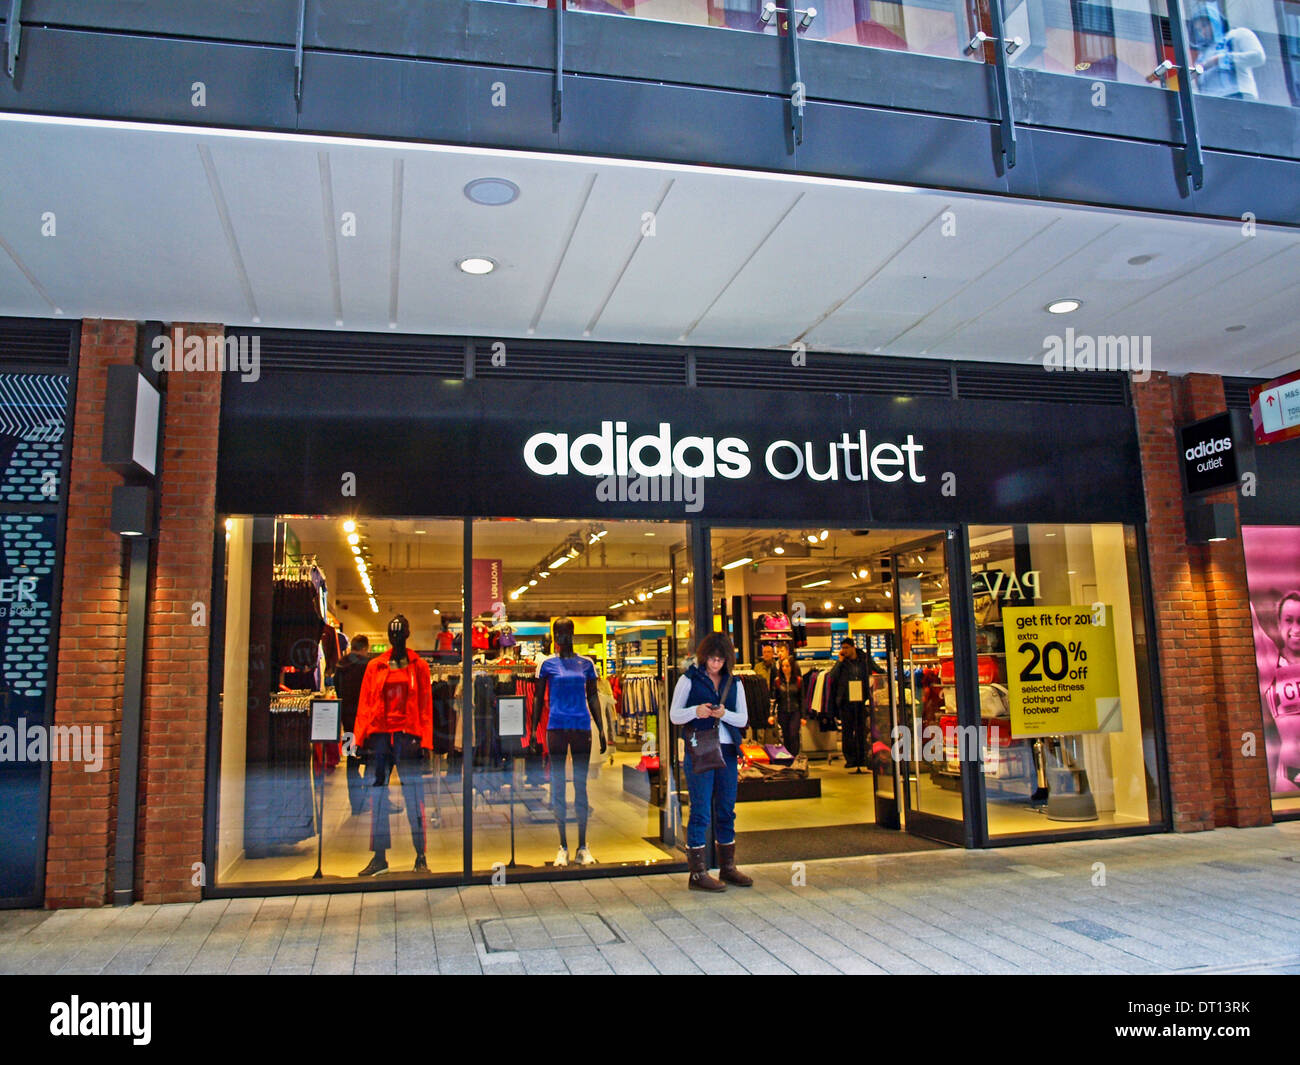 adidas outlet uk stores 